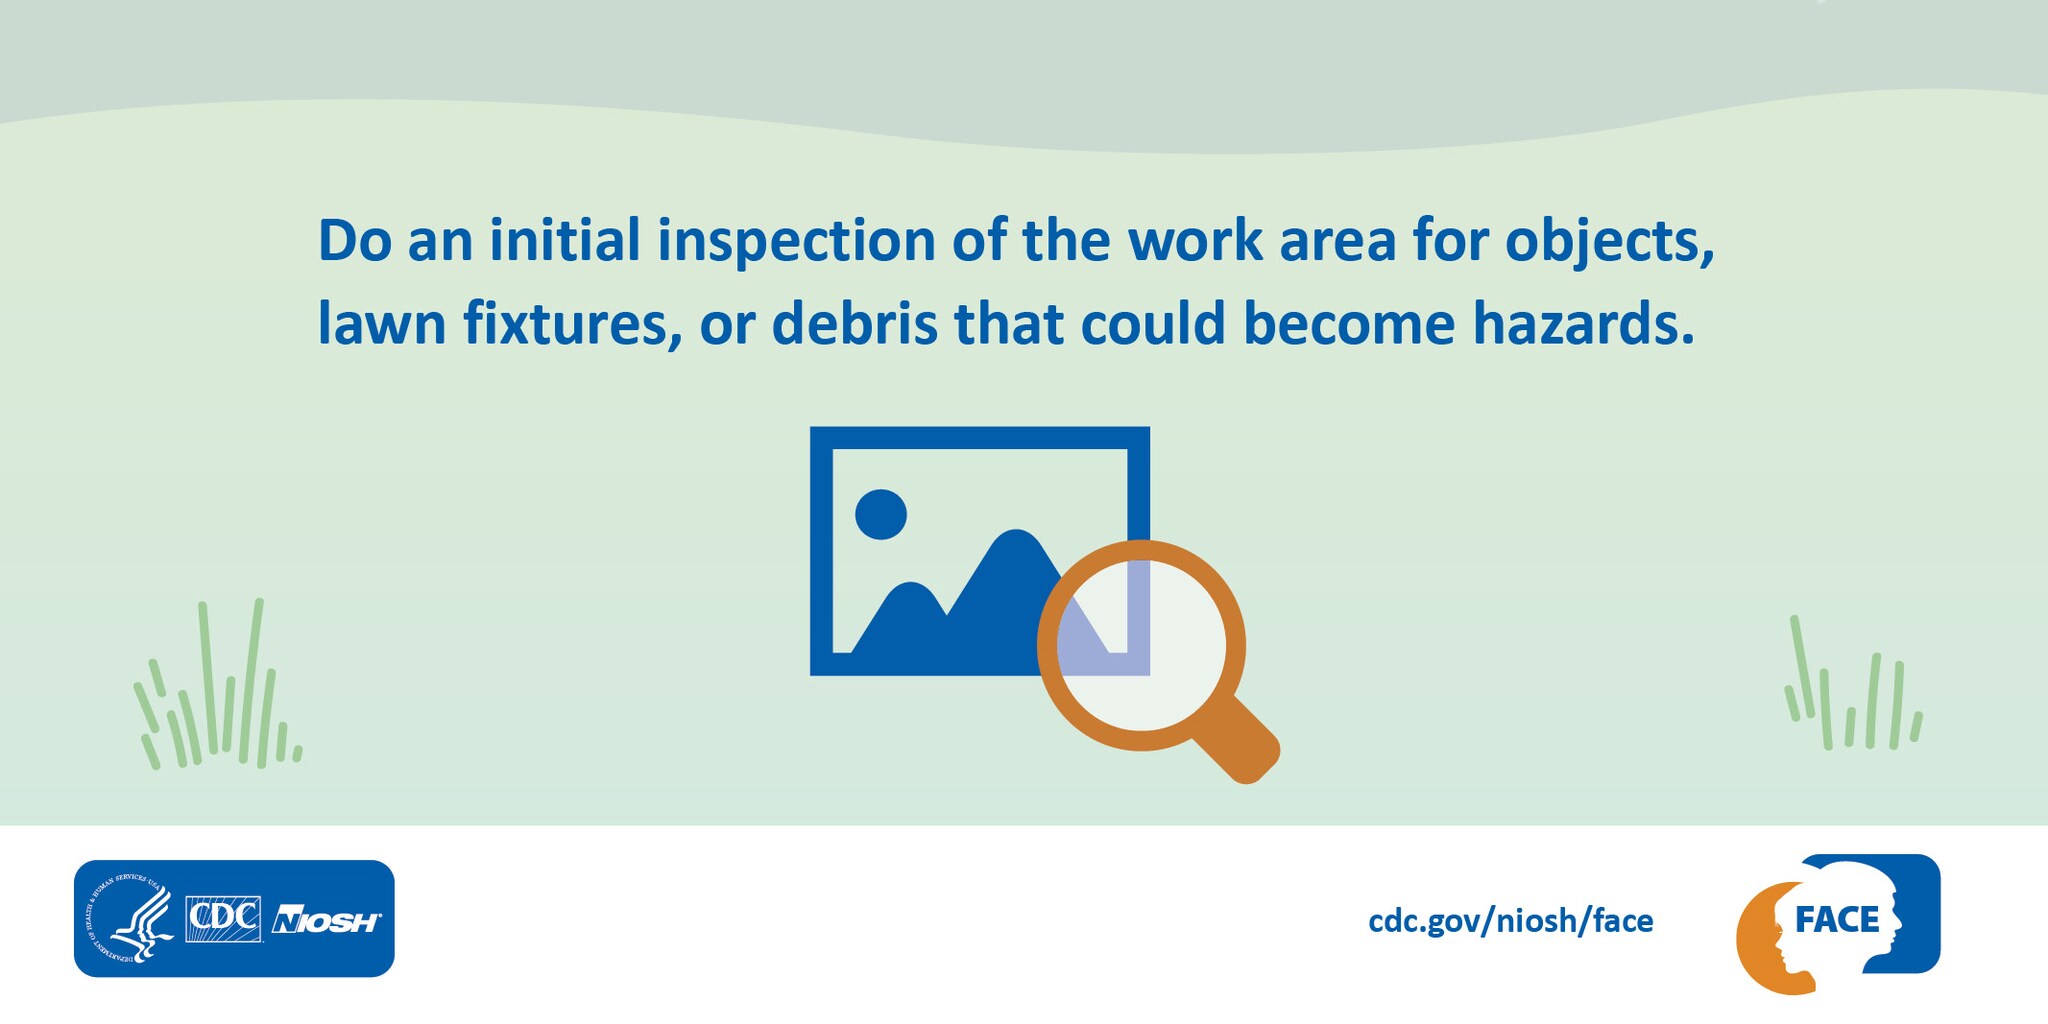 Do an initial inspection of the work area fro objects, lawn fixtures, or debris that could become hazards.